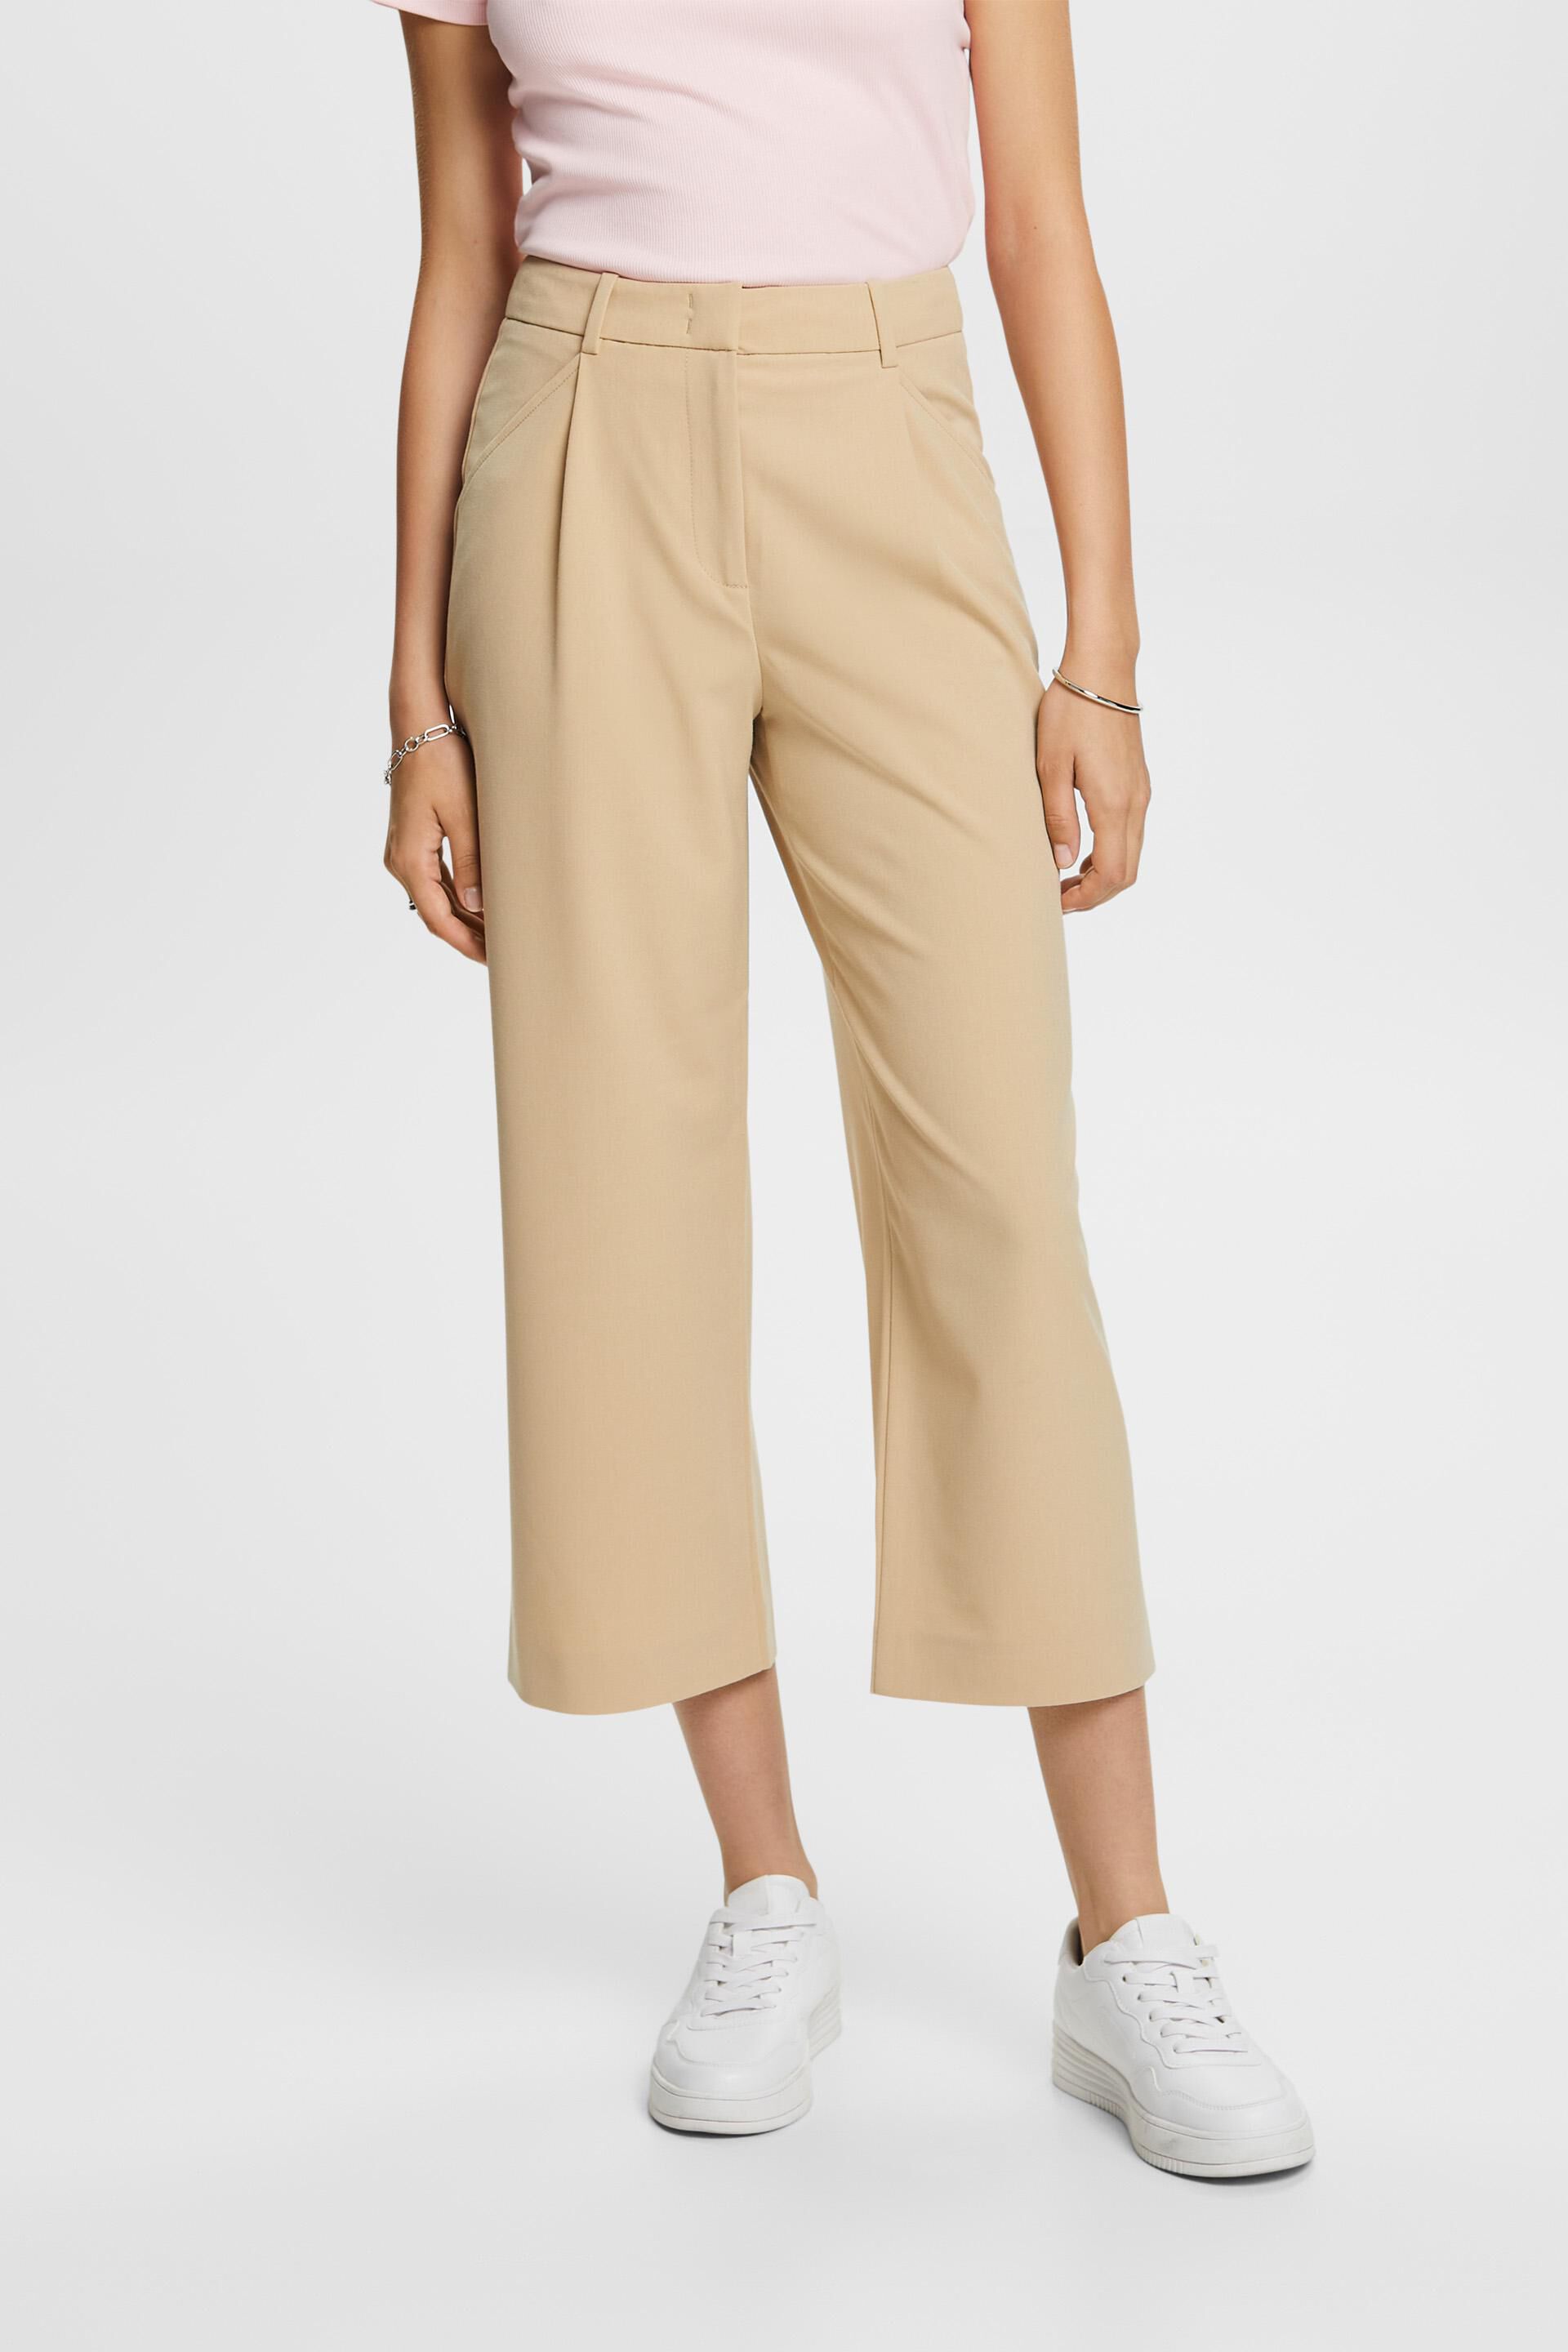 Esprit waist pleats High-rise culottes with